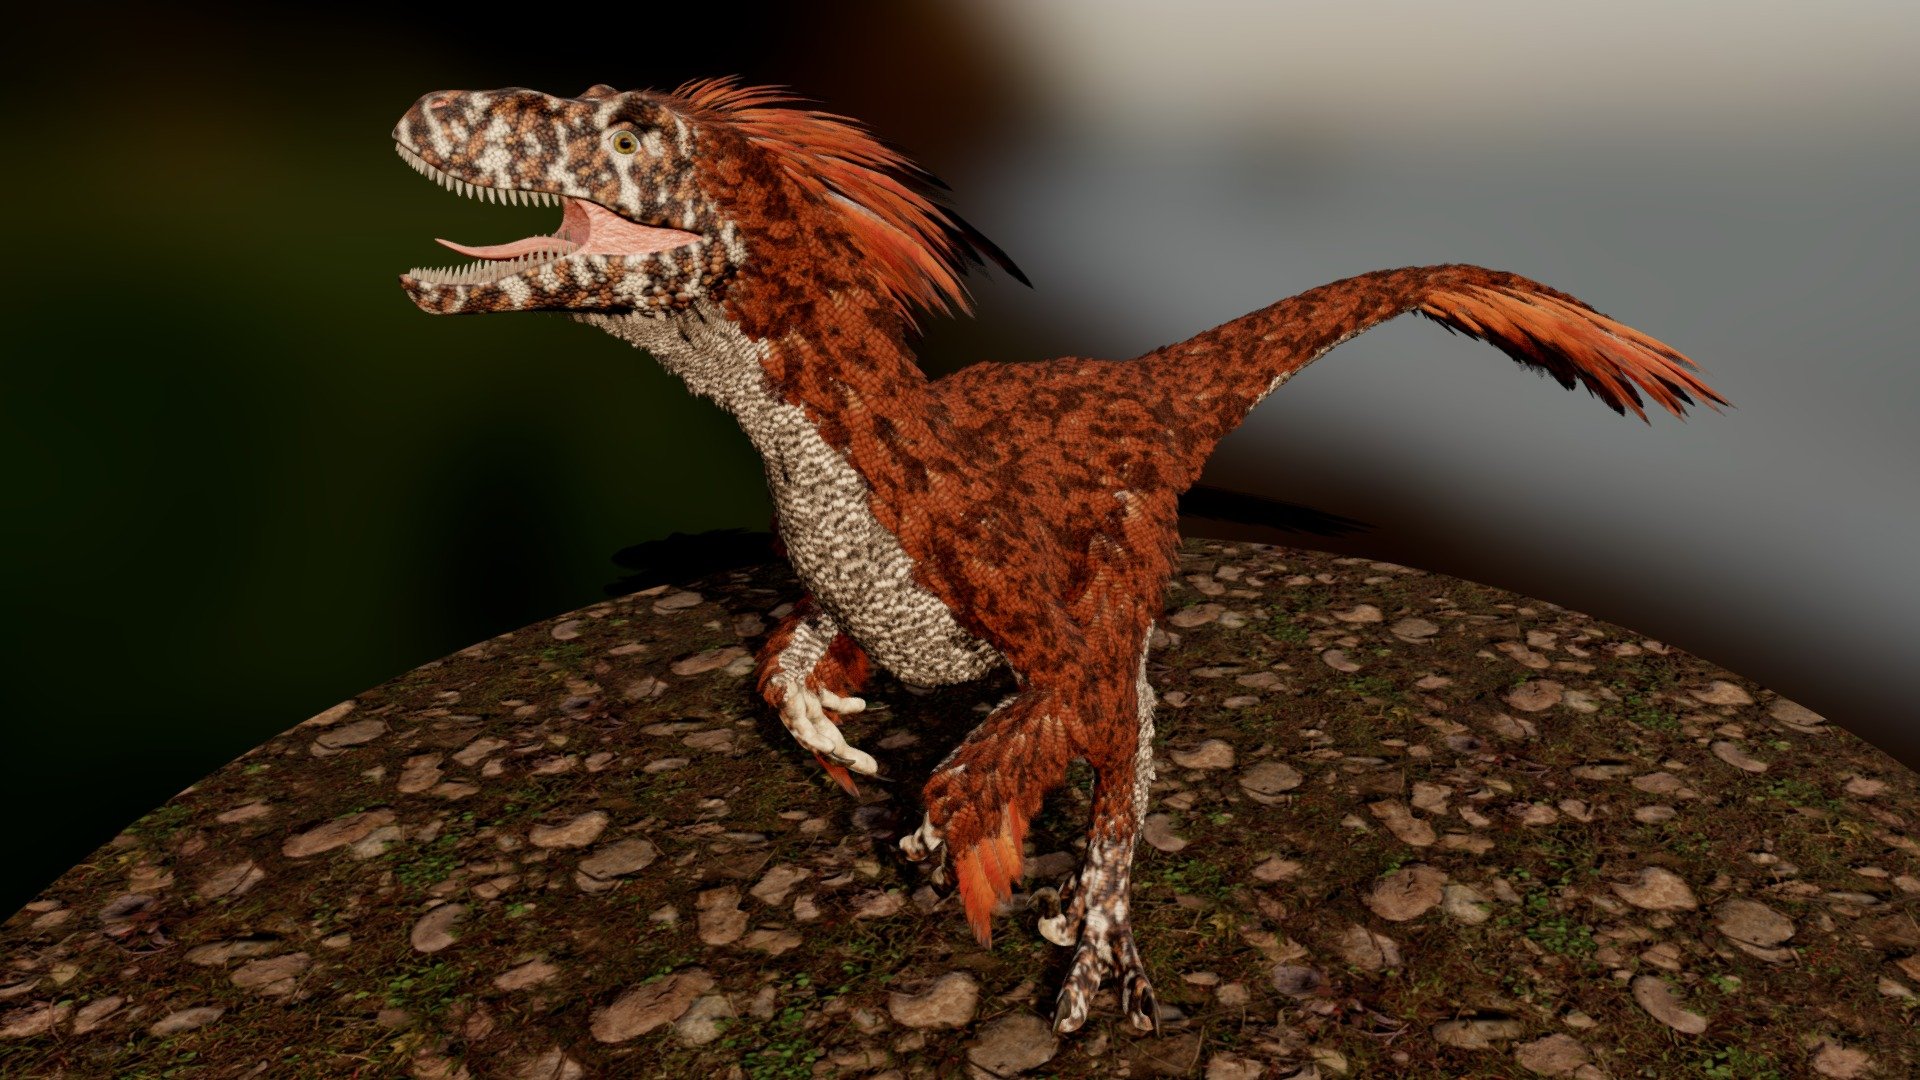 Deinonychus Antirrhopus, Personal work
You can check out full-quality renders with poses and backround world: https://www.artstation.com/artwork/YKWmoq animations are also there 3d model